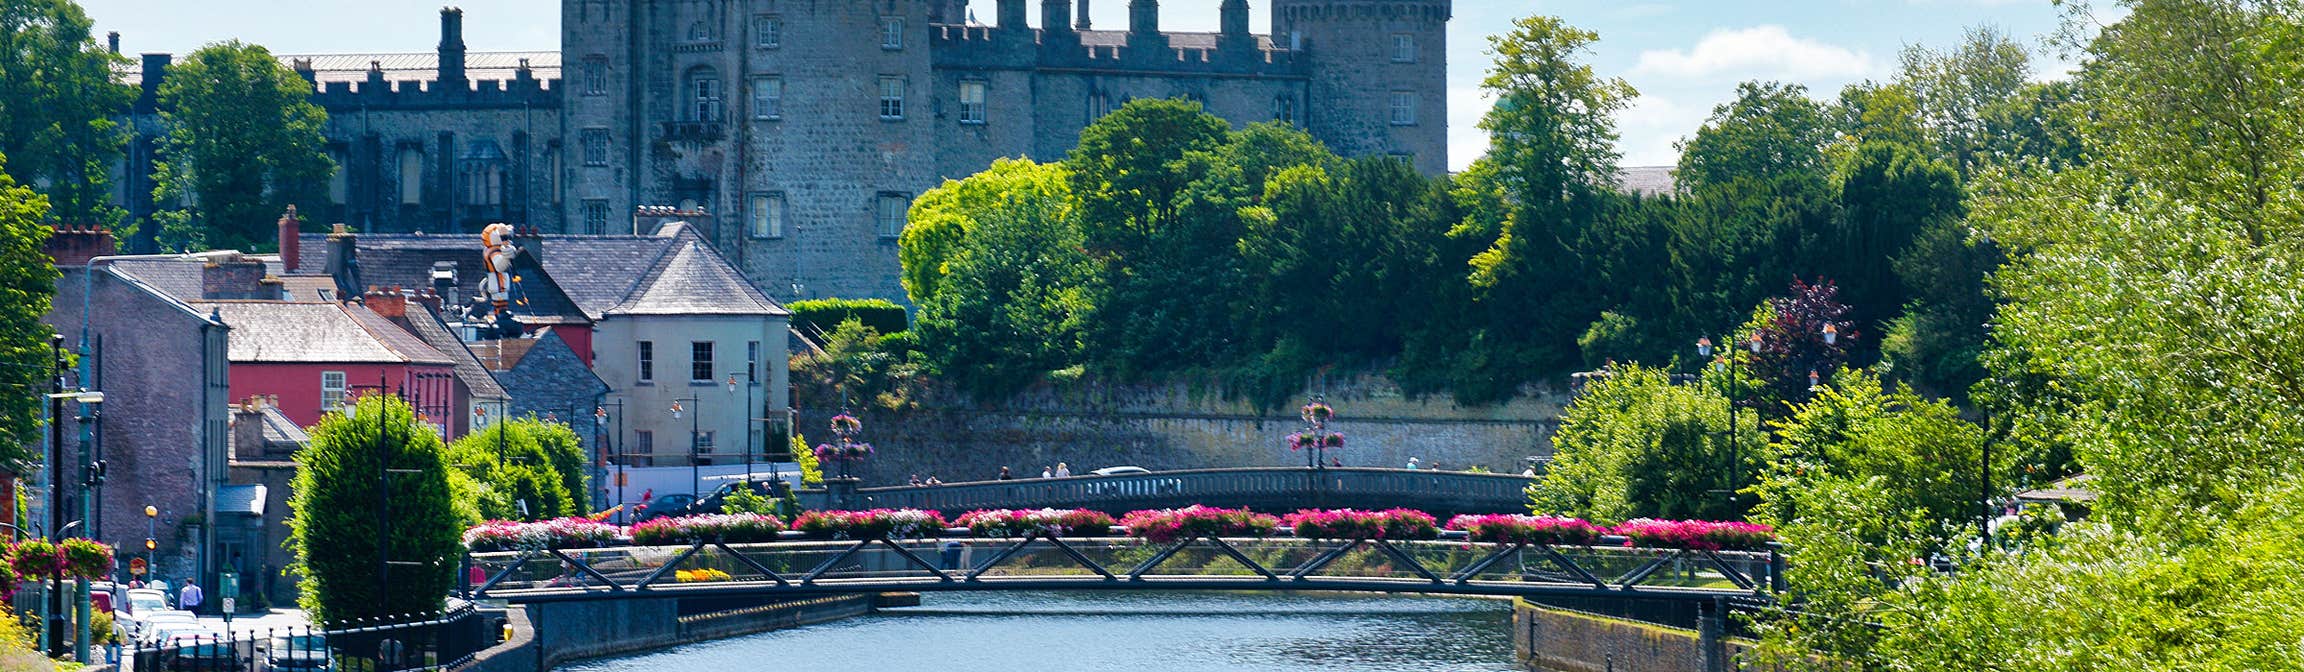 Kilkenny Castle from the River Nore, County Kilkenny